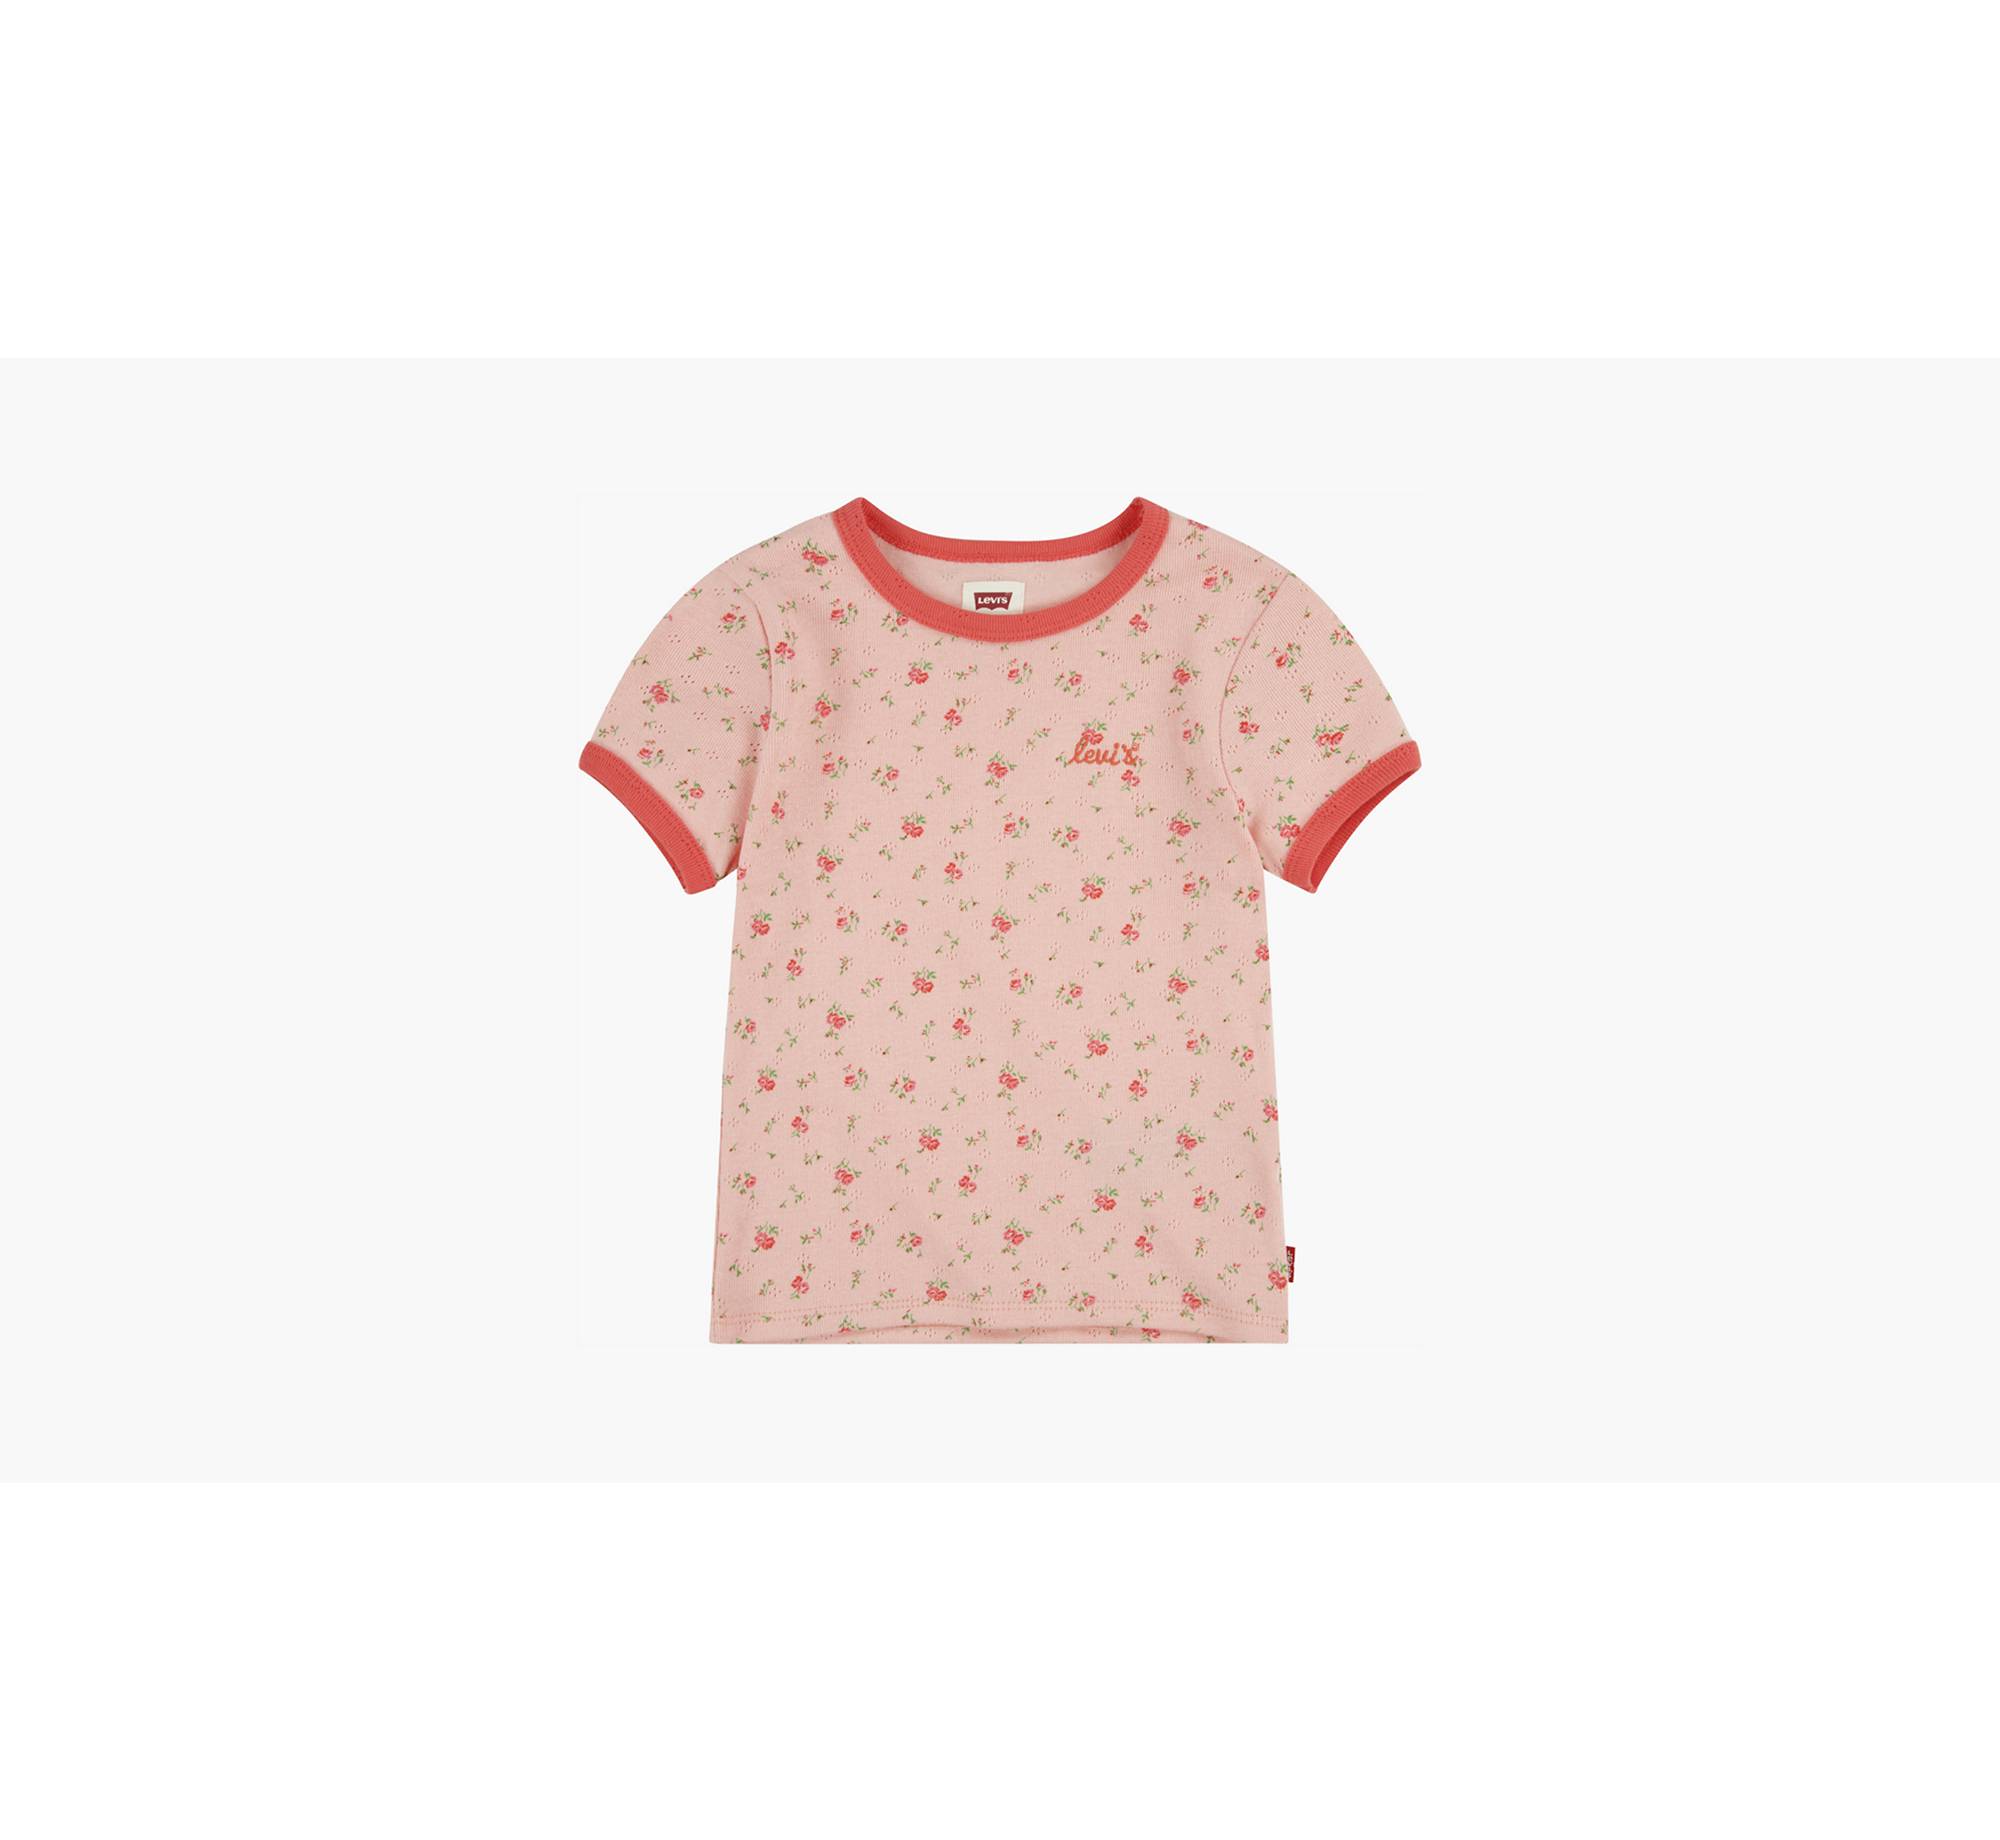 Short Sleeve Meet and Greet Ditsy Floral Ringer Tee Little Girls 4-6x 1